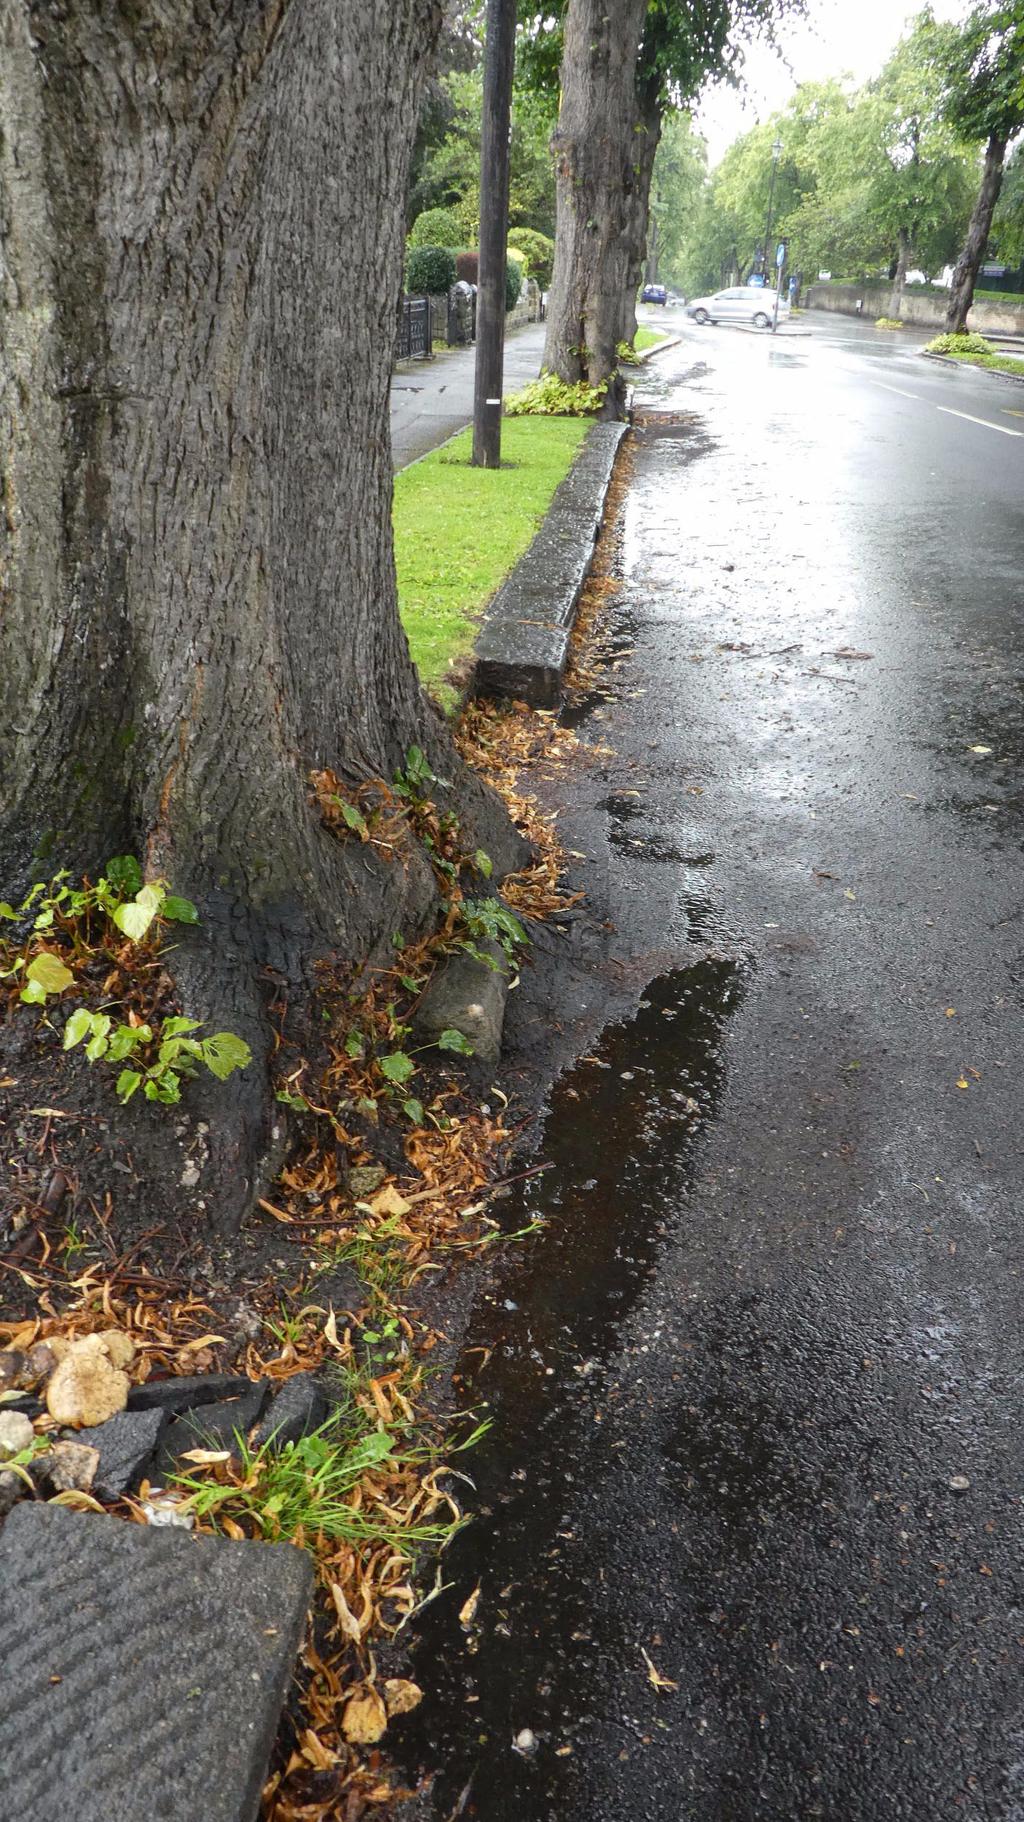 In a farcical attempt to pretend that there is a rational excuse for felling large numbers of healthy mature street trees, Amey, the Streets Ahead Contractor, has claimed that tree roots that